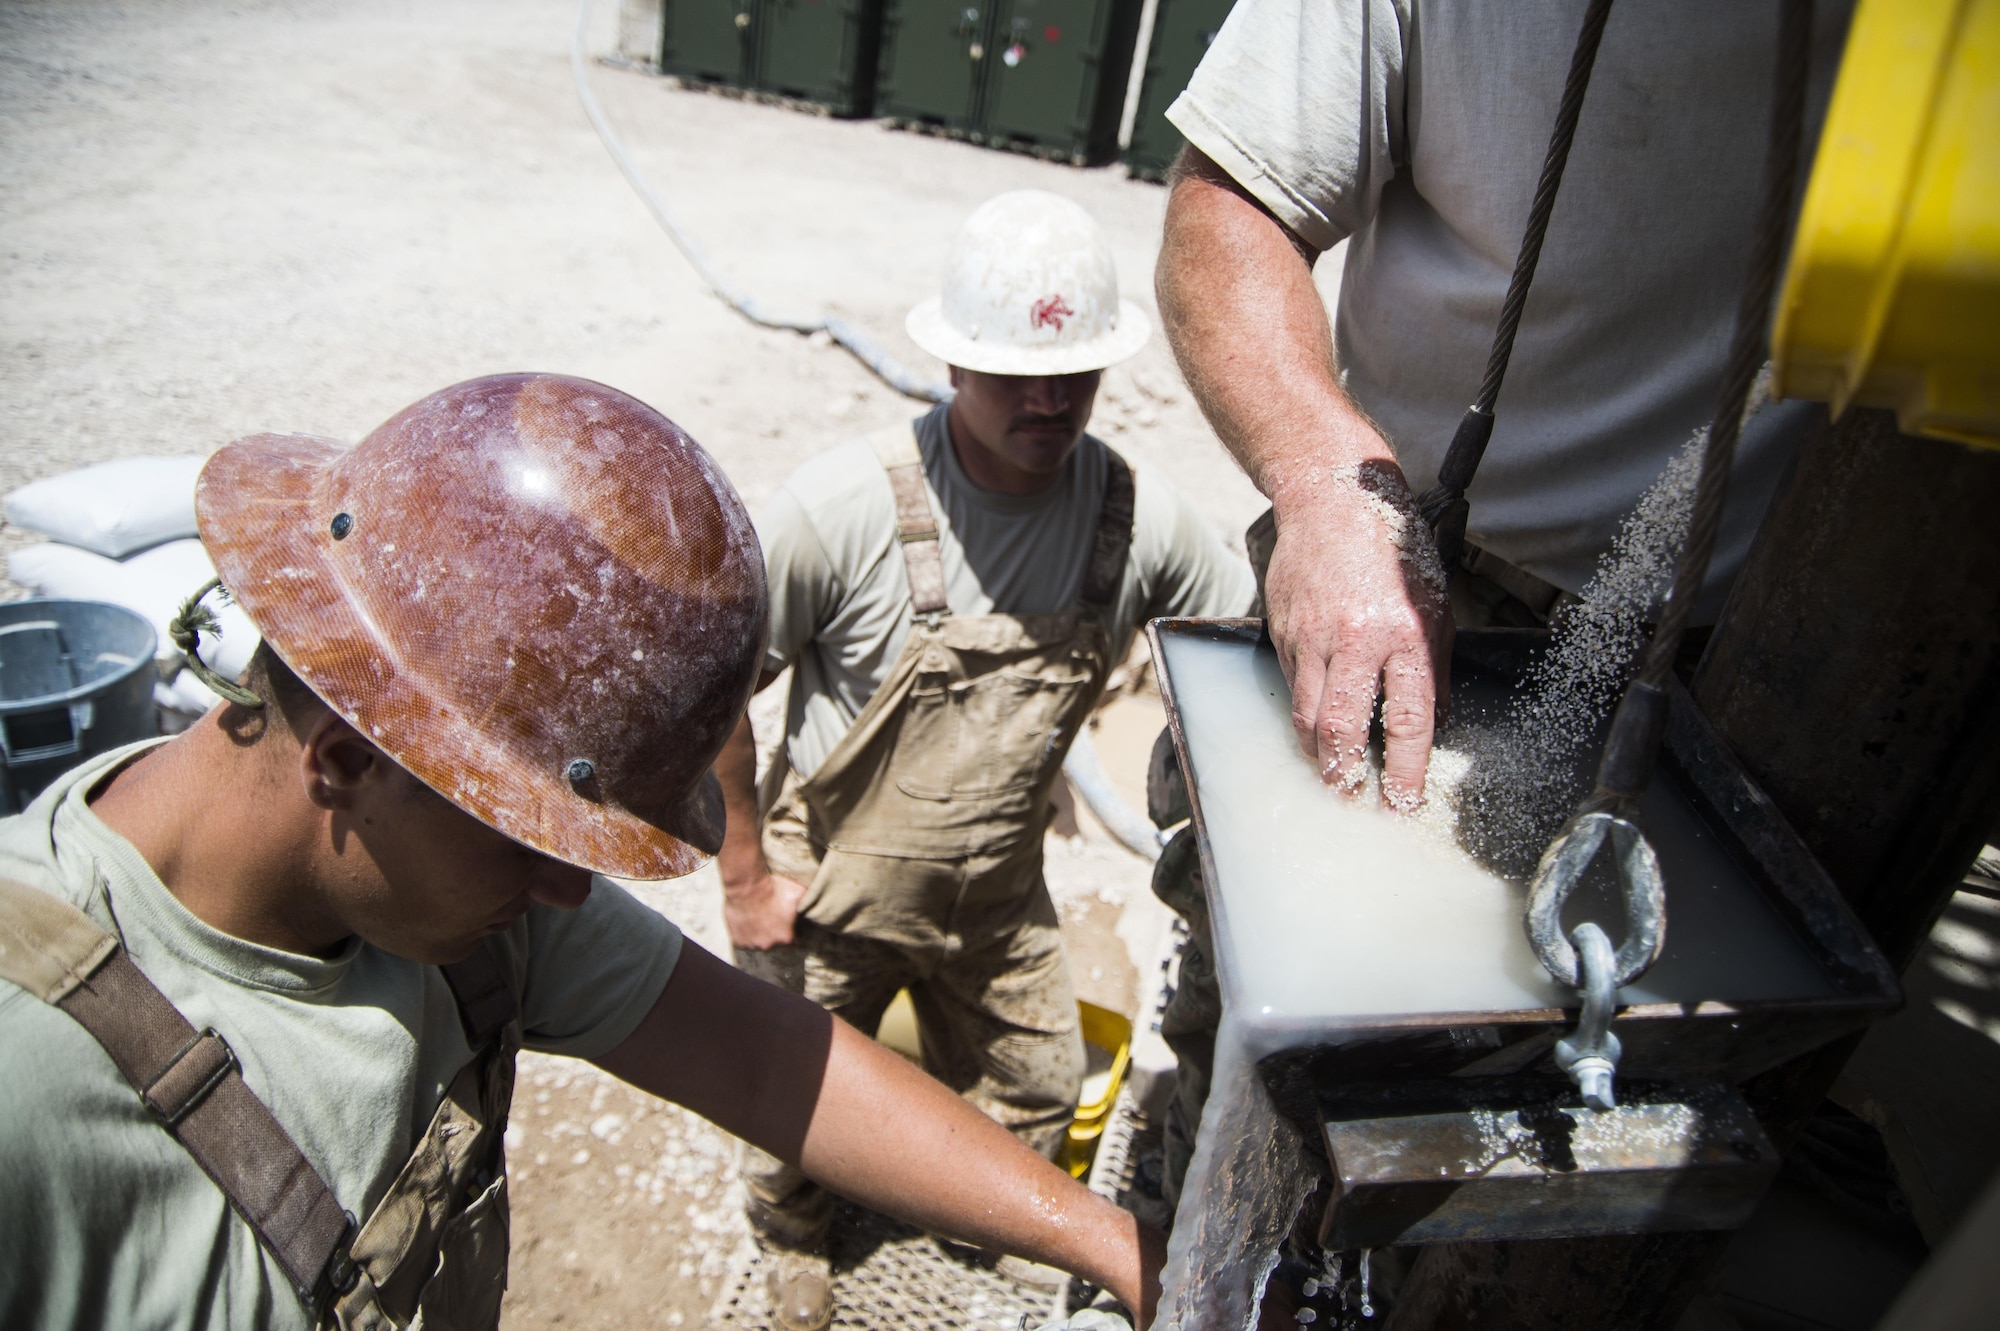 Airmen assigned to the 557th Expeditionary Red Horse Squadron, mix sand with water to pour into the well site at Al Taqaddum Air Base, Iraq, June 2, 2016. The 557th ERHS well drilling team are obtaining an organic water source for Al Taqaddum. Red Horse is helping to improve Iraq's infrastructure in support of the Government of Iraq.
(U.S. Air Force photo/Staff Sgt. Larry E. Reid Jr., Released)